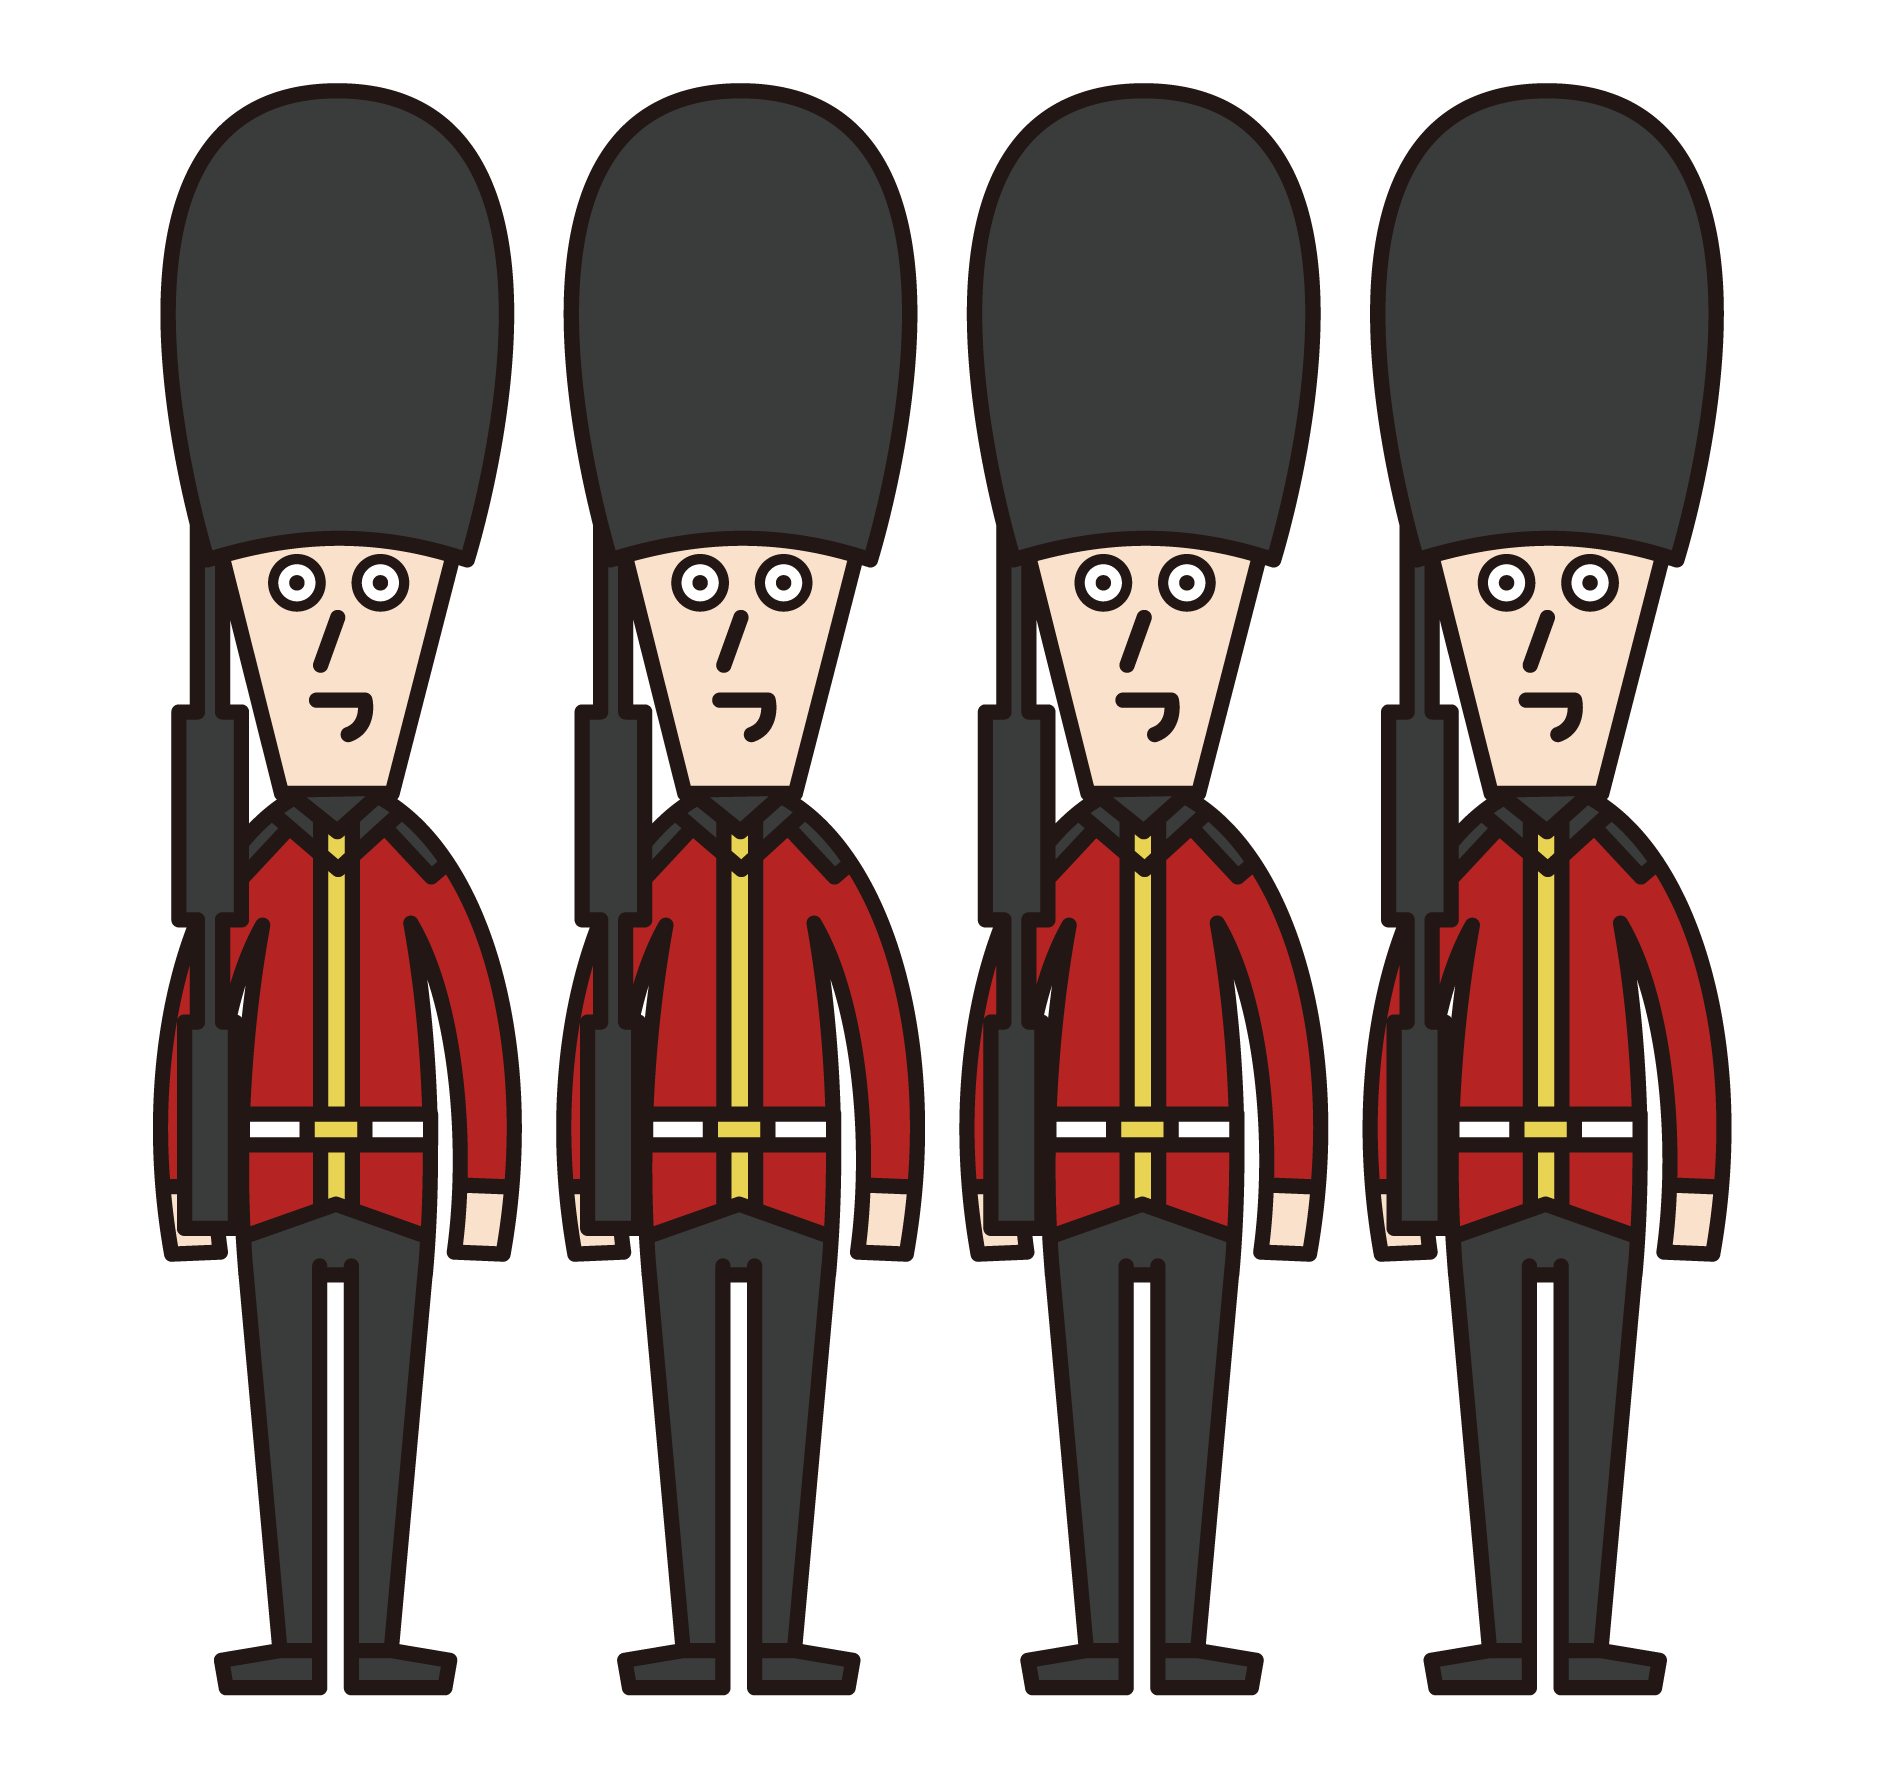 Illustration simento of the British soldiers aligning